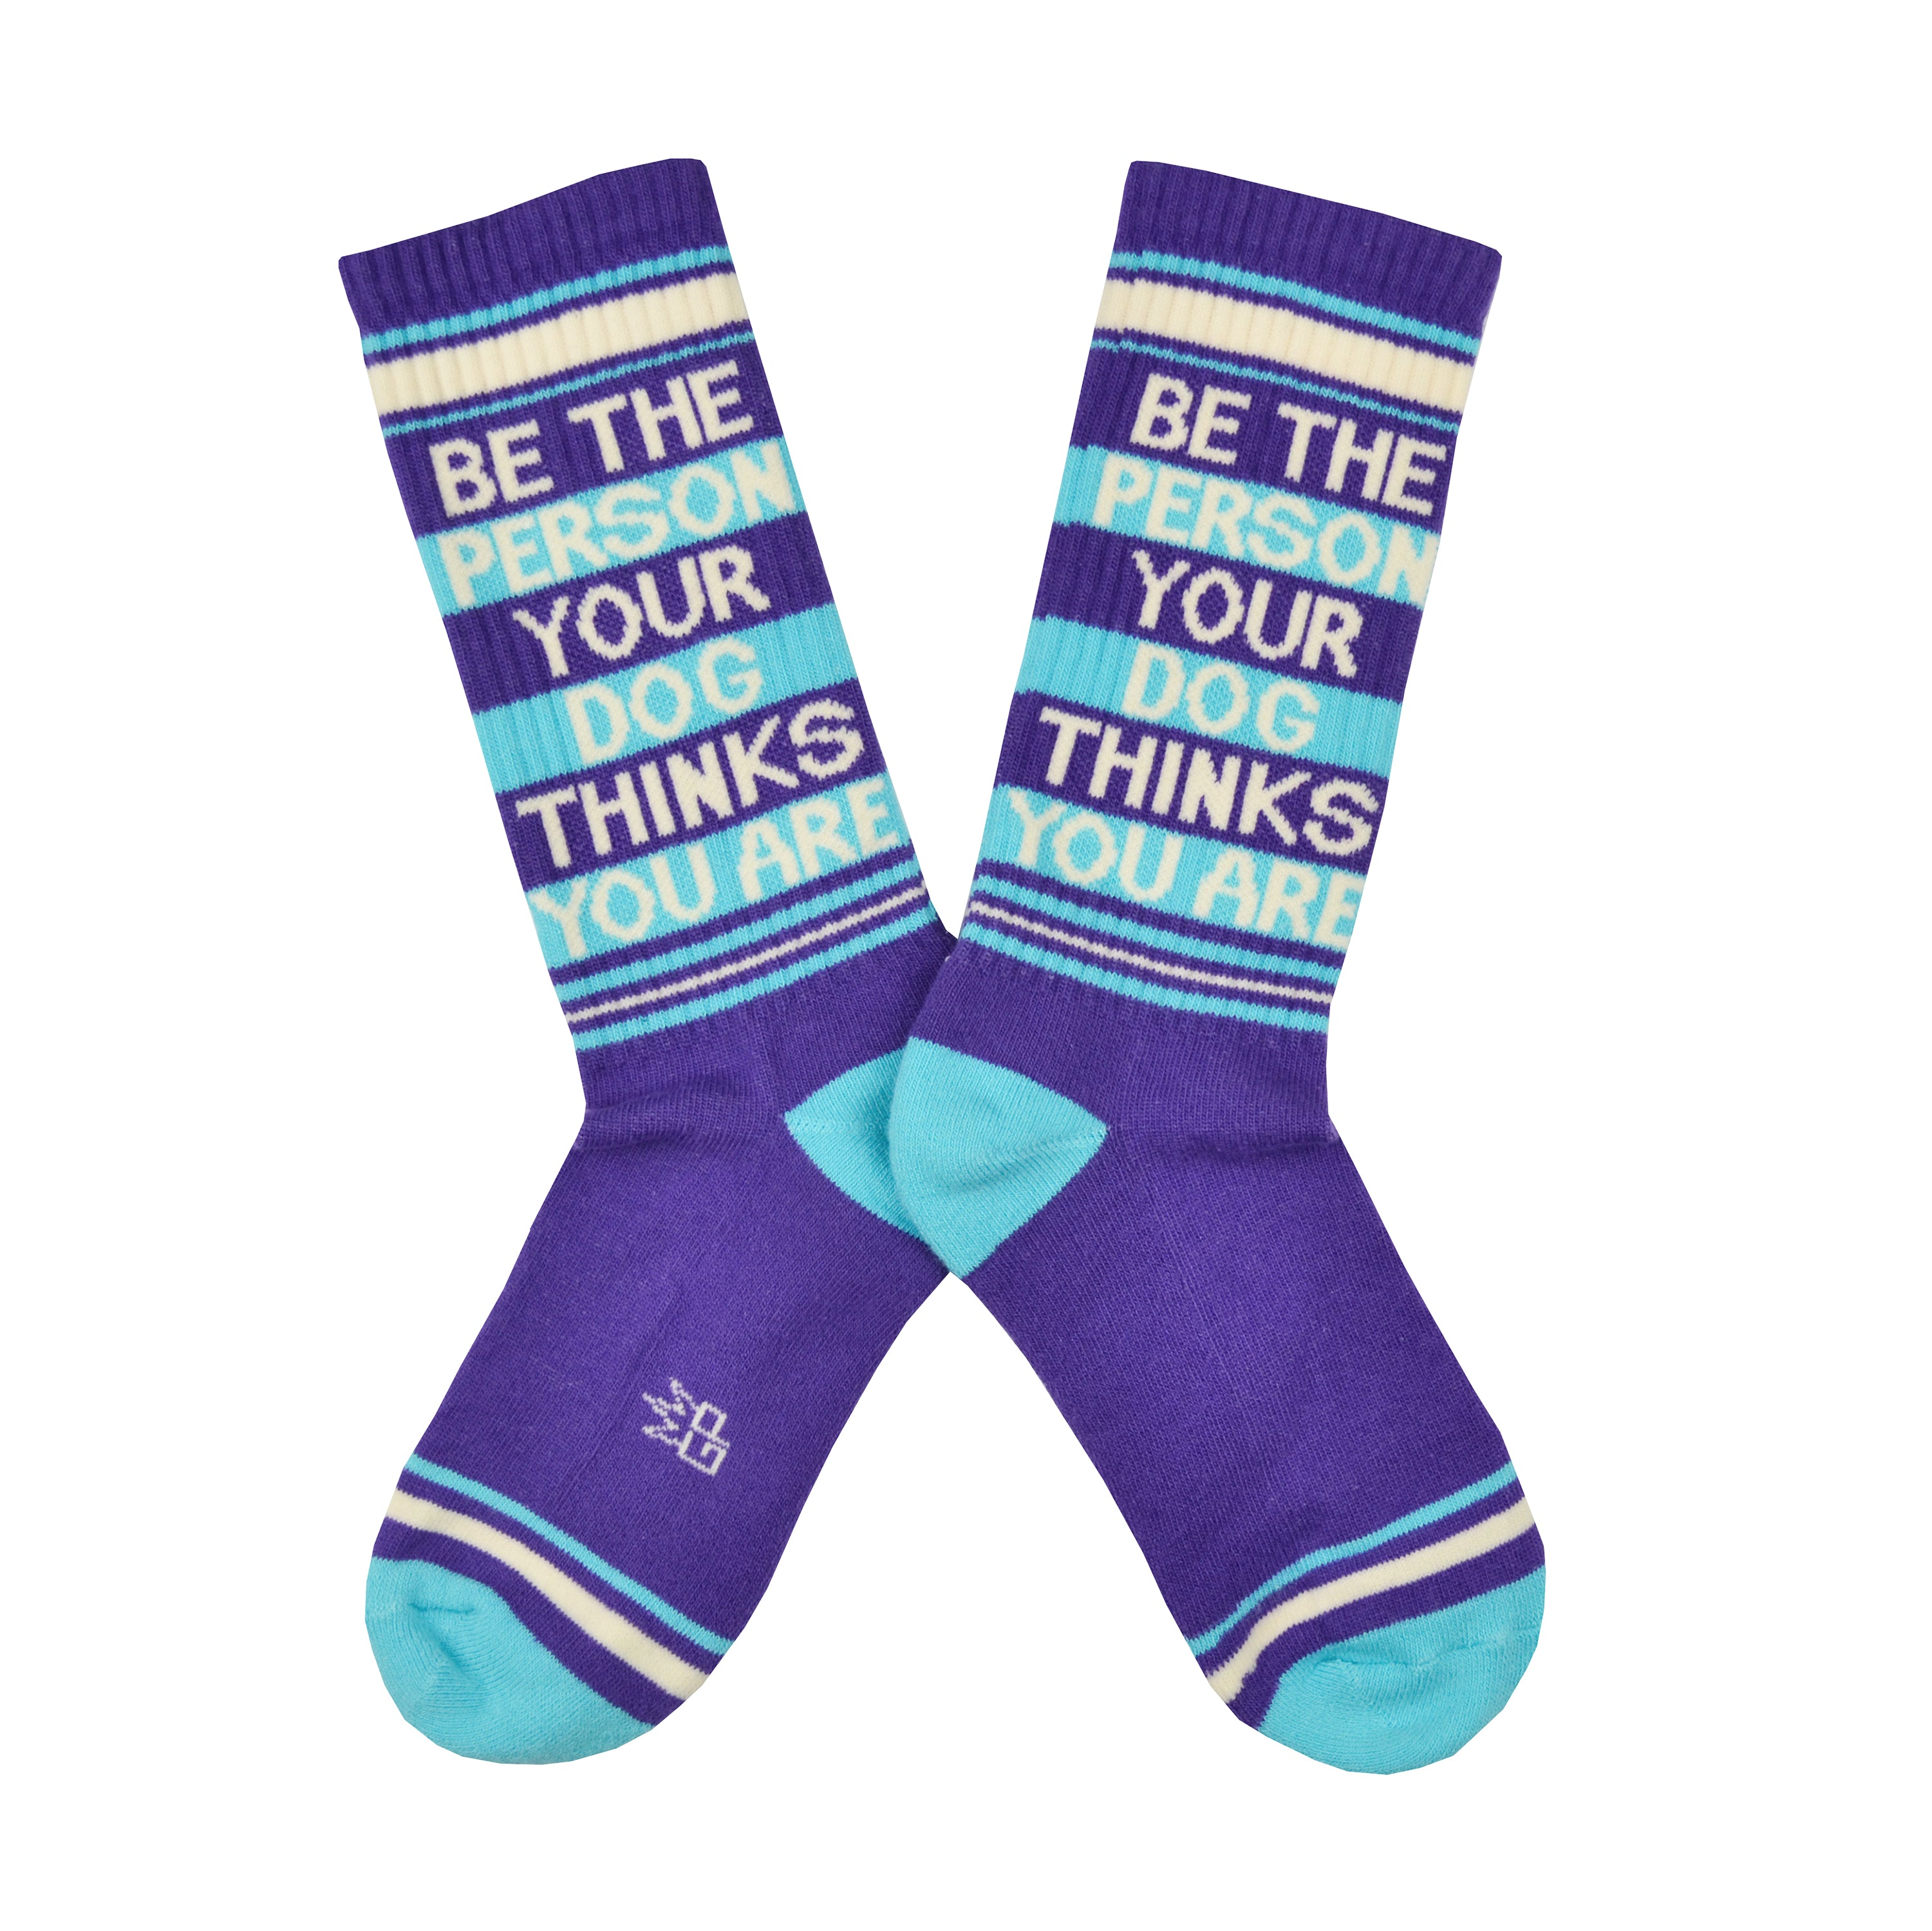 Shown in a flatlay, a pair of Gumball Poodle brand unisex cotton crew sock in purple with cream and blue stripes around the leg and a blue heel and toe. On the side of the sock in cream lettering it says, 